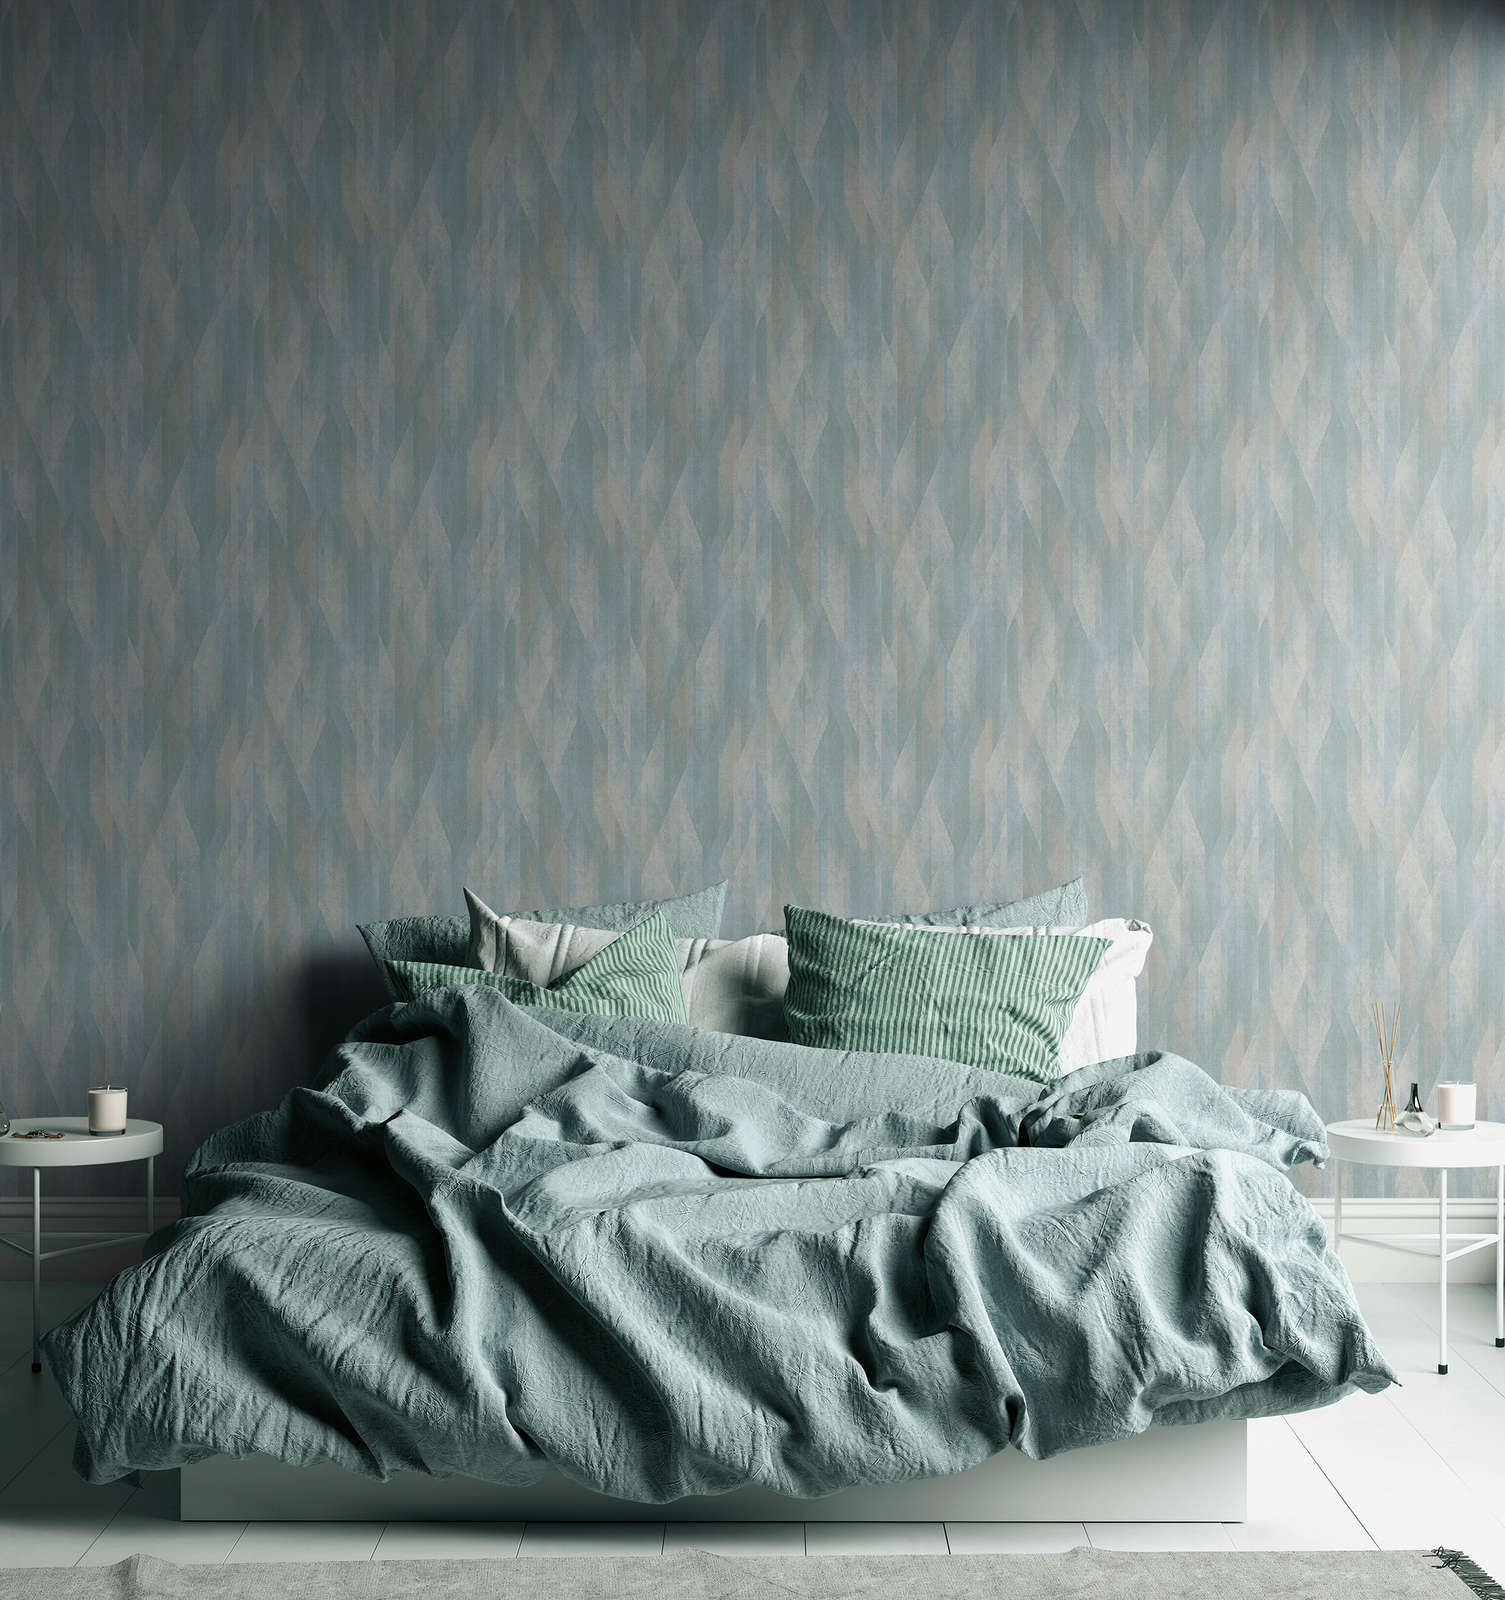             Pattern wallpaper with graphic lozenges - turquoise, blue, cream
        